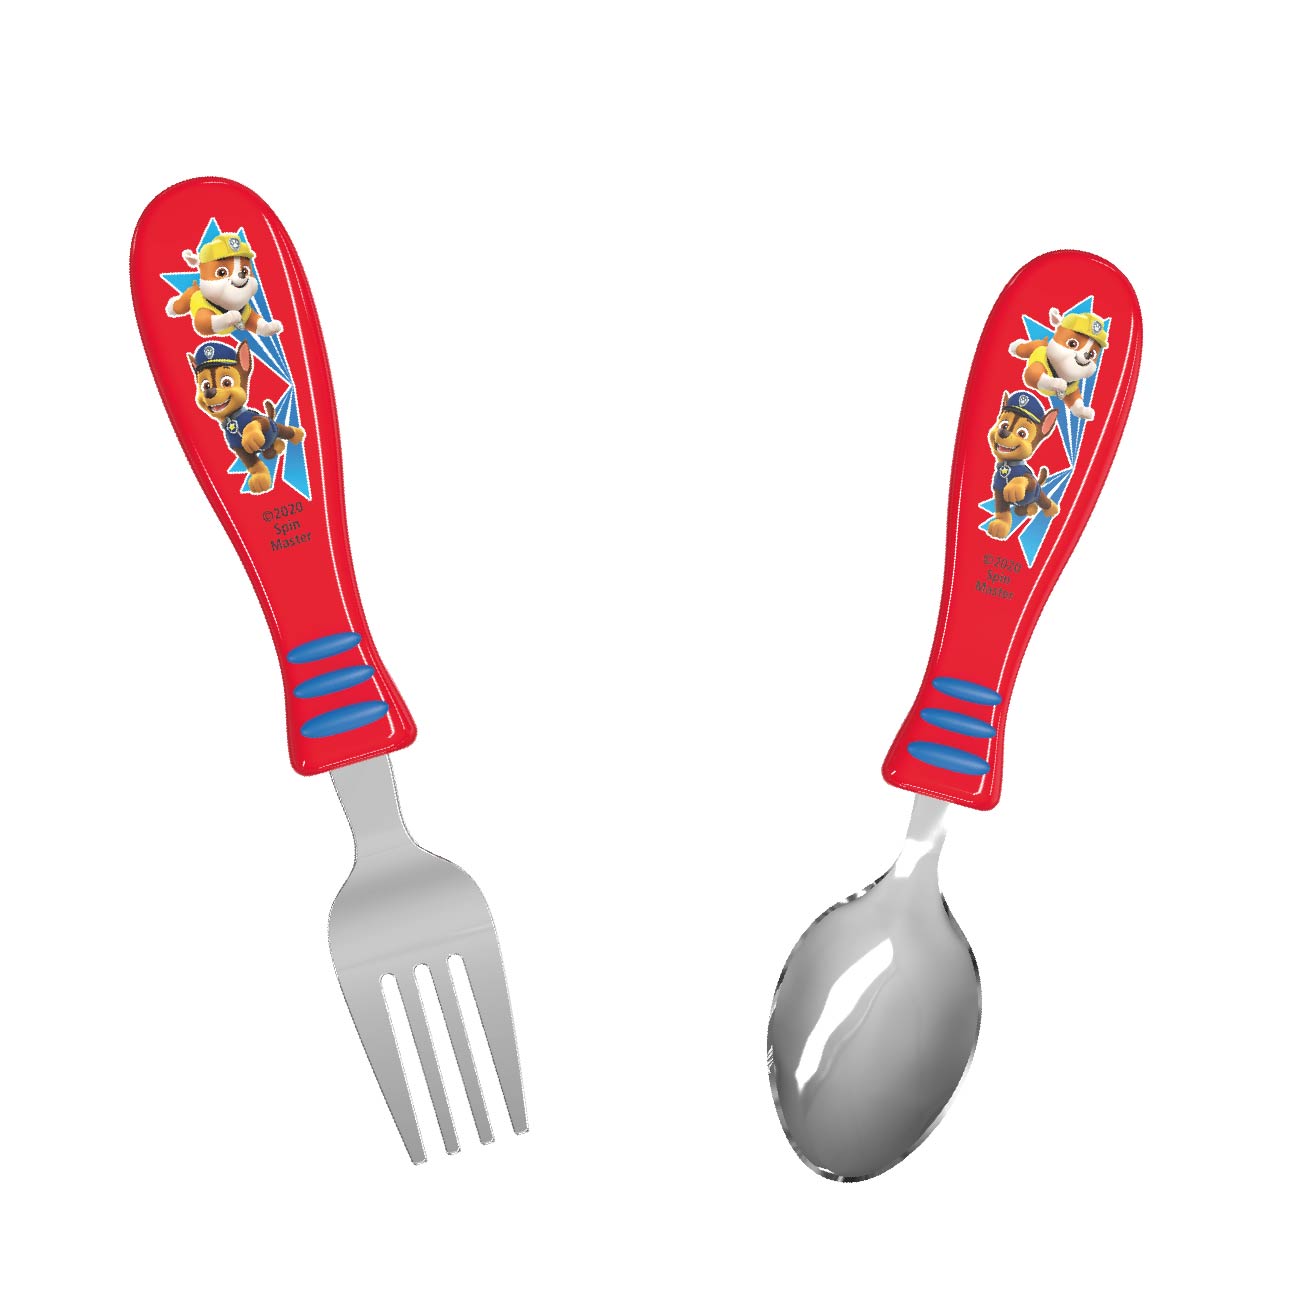 Paw Patrol Kid’s Flatware, Chase and Rubble, 2-piece set slideshow image 2